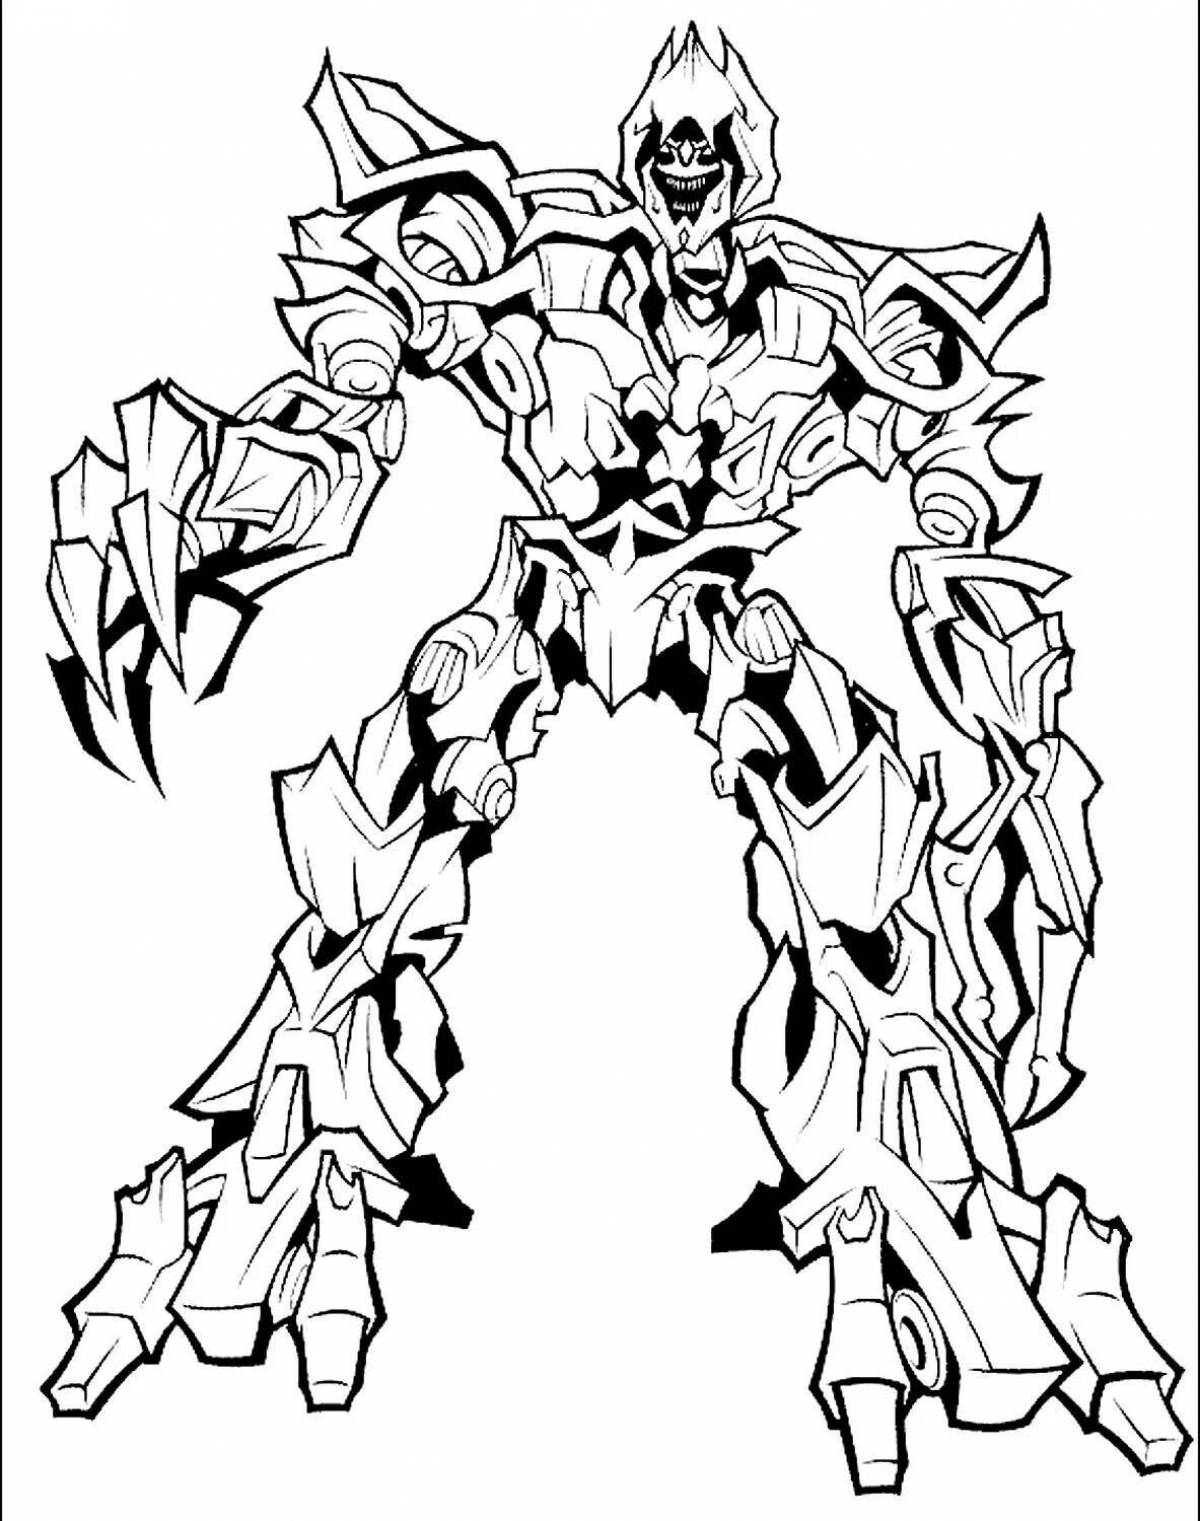 Colorfully illustrated megatron coloring book